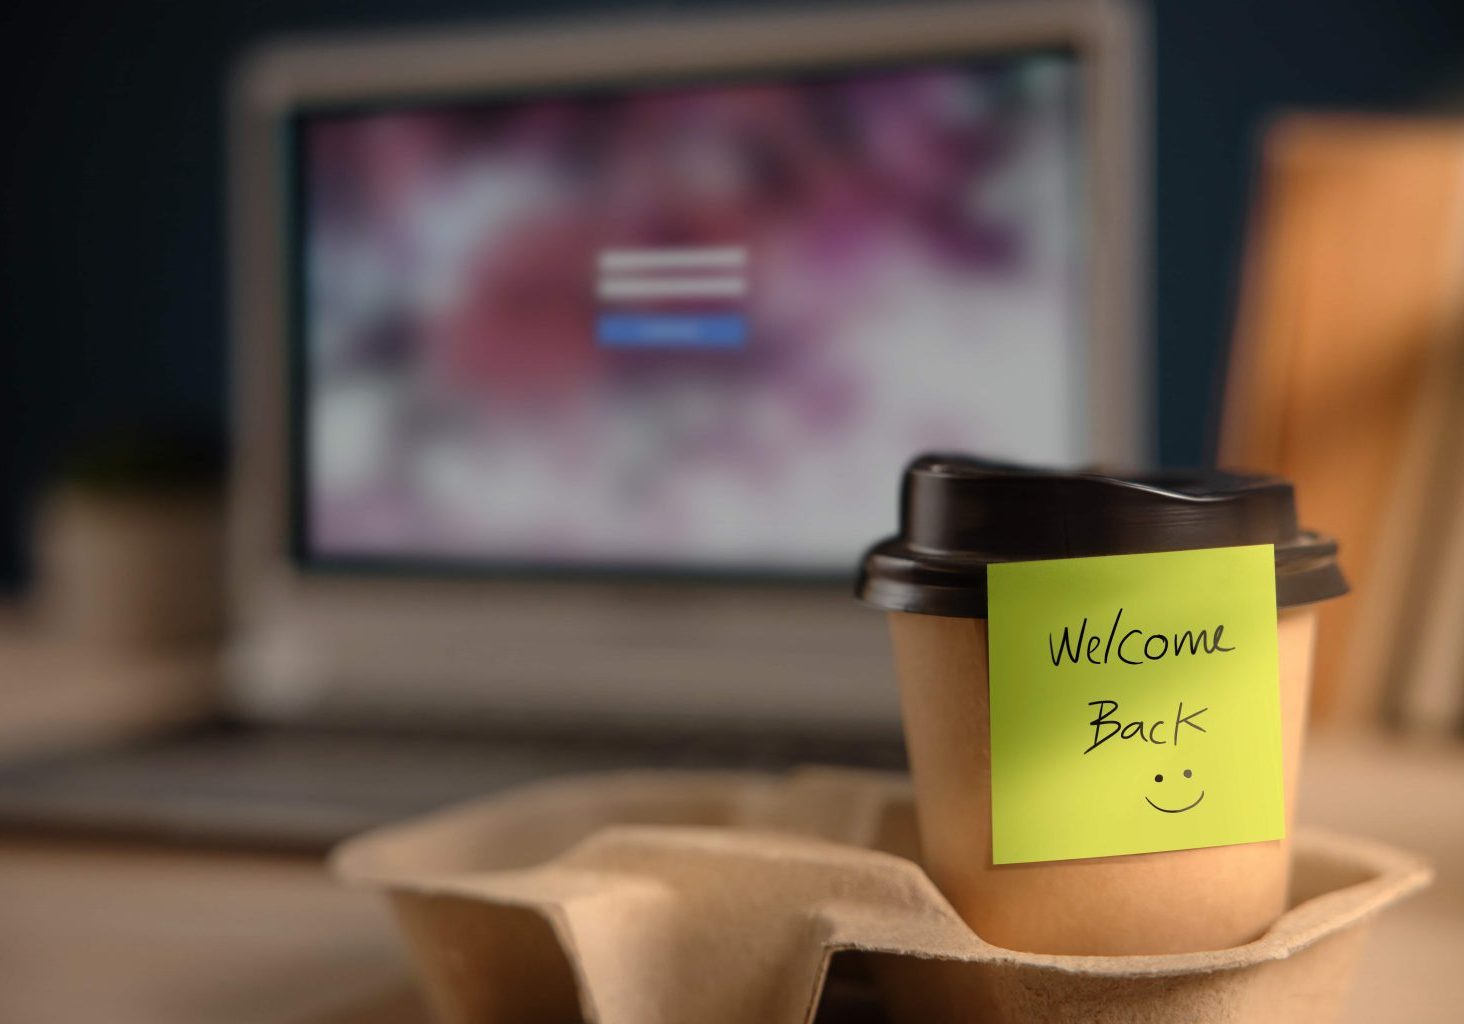 Back to Work Concept. Closeup of Welcome Note on Takeaway Coffee Cup in Office Desk. Message from a Colleague or Boss